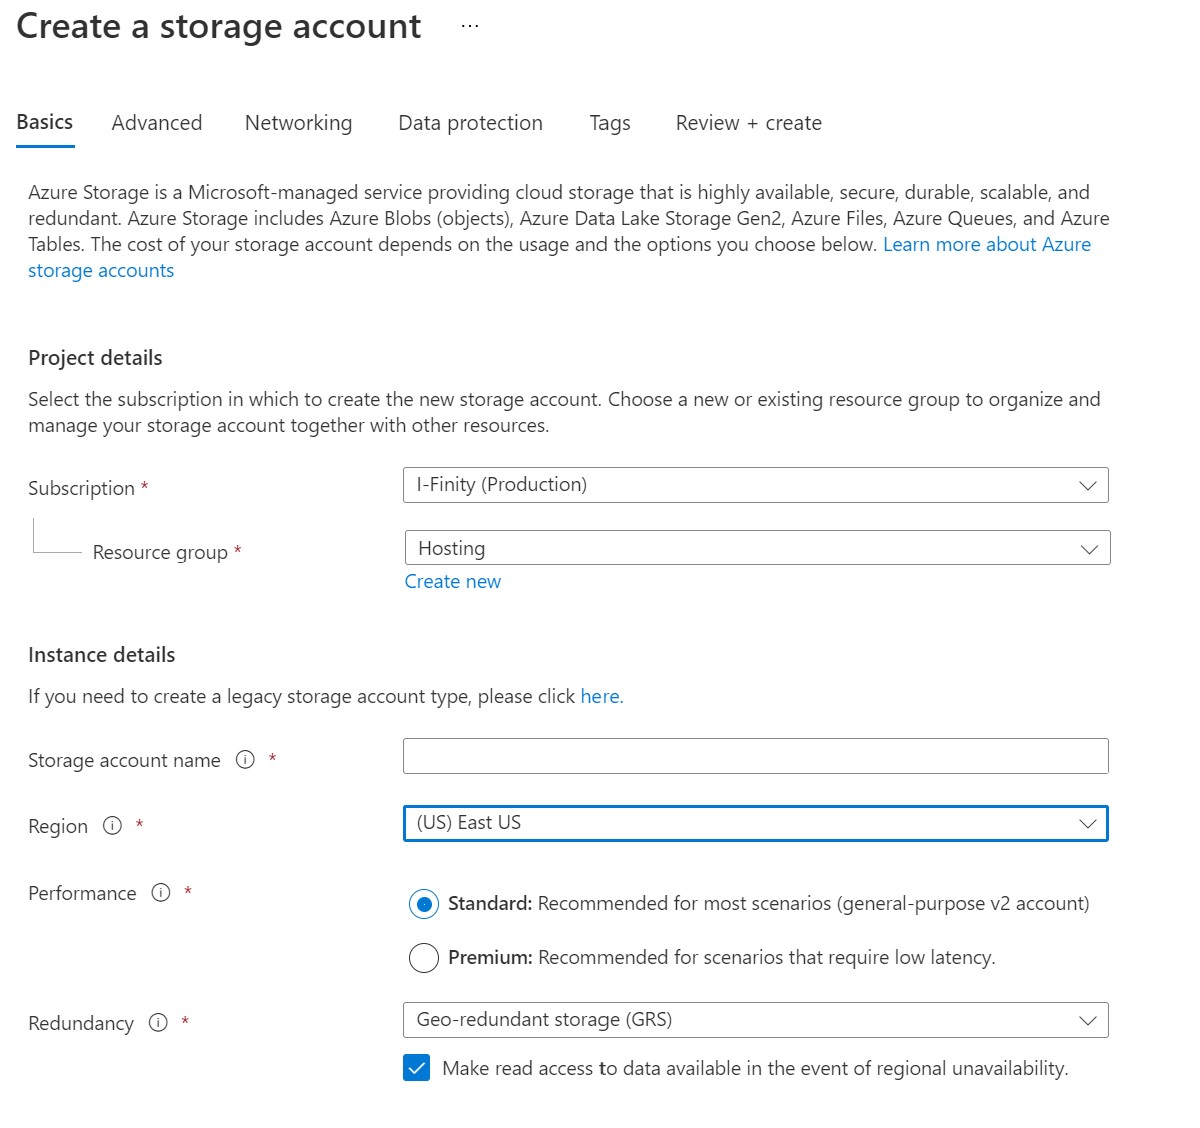 Creating your Storage Account